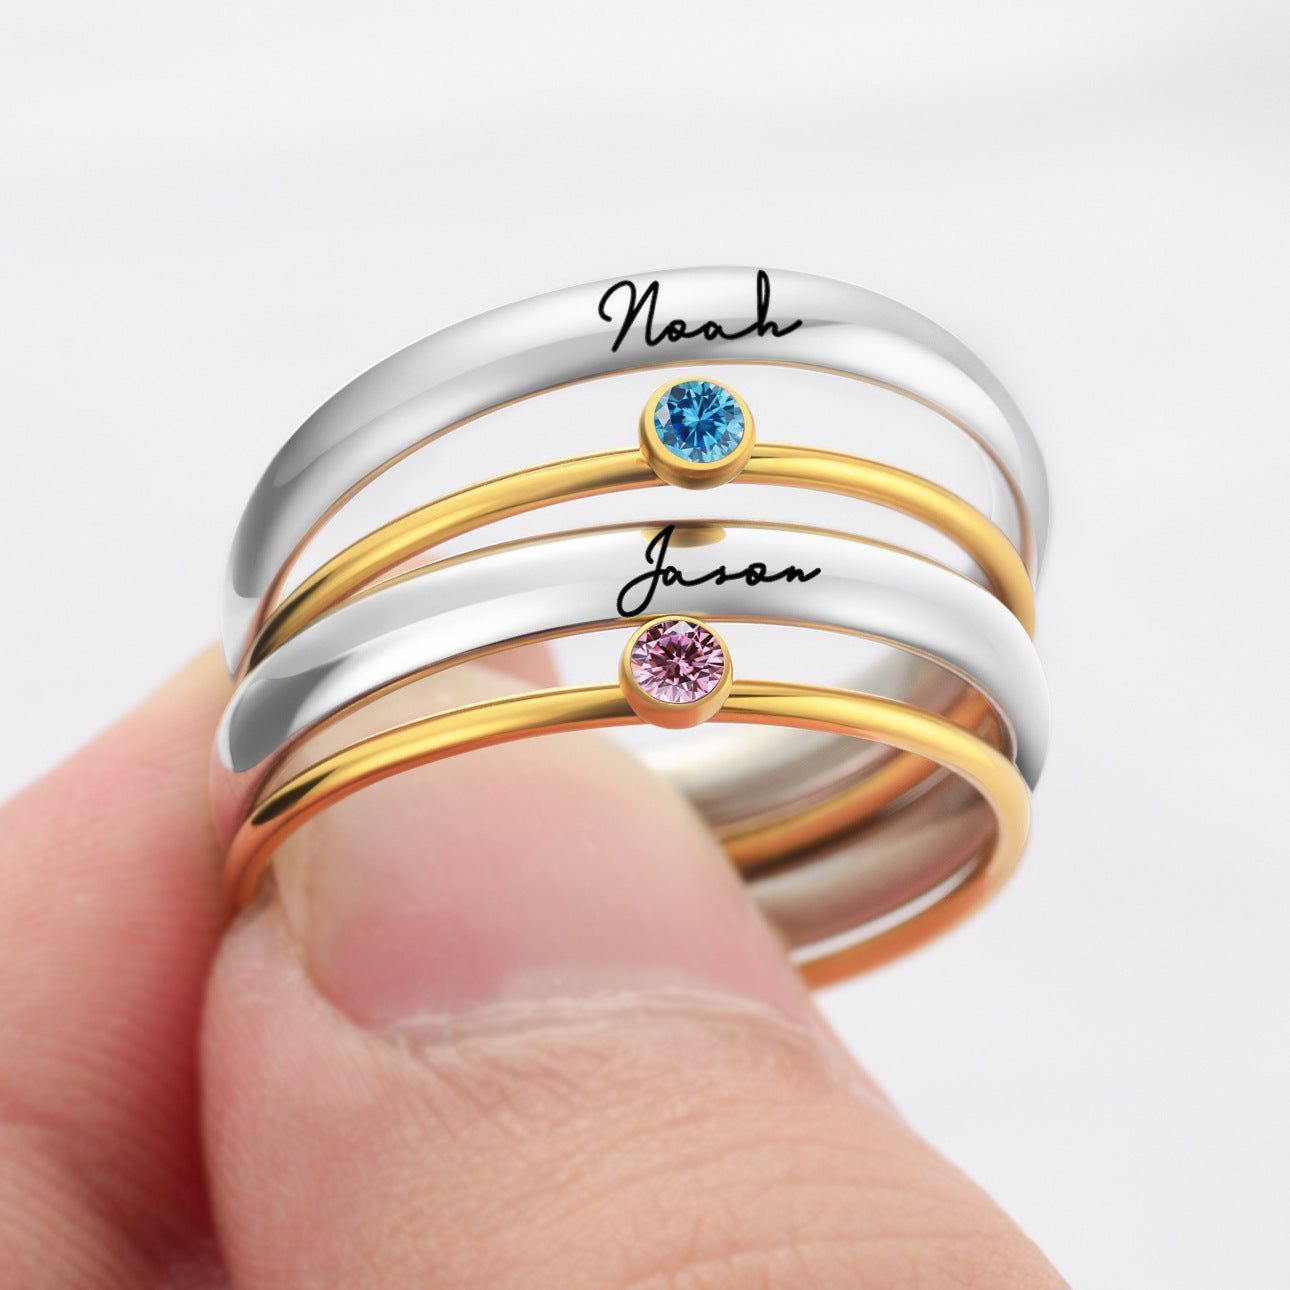 Personalized Birthstone Ring | Custom Name Ring | Custom Birthstone Ring Engraving